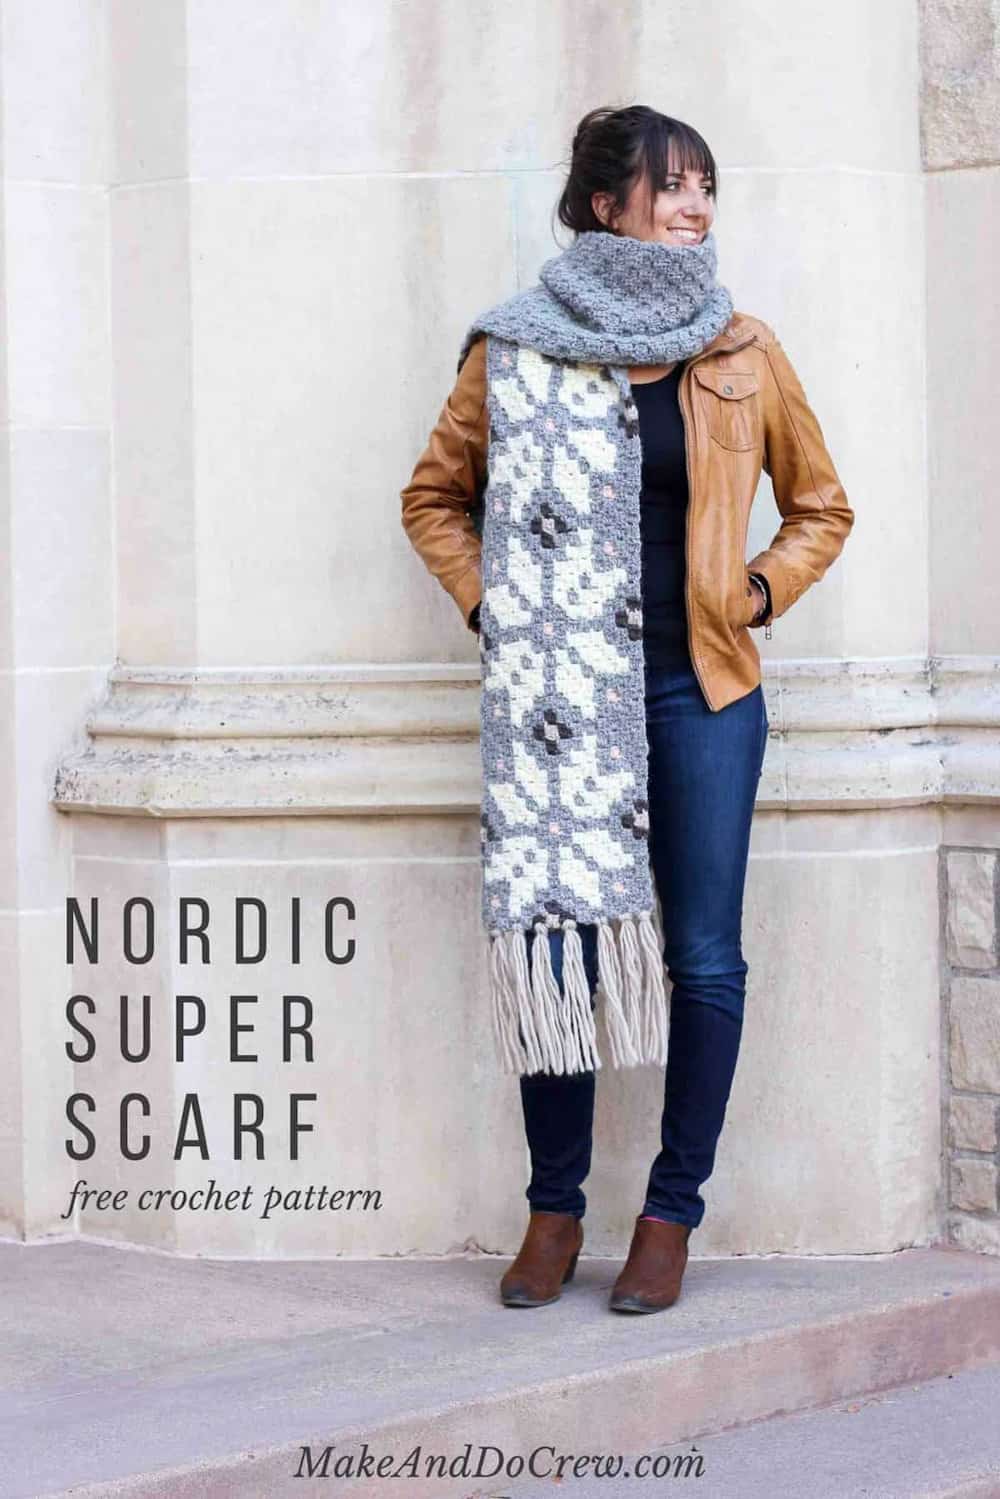 The model is dressed in a Nordic long scarf.